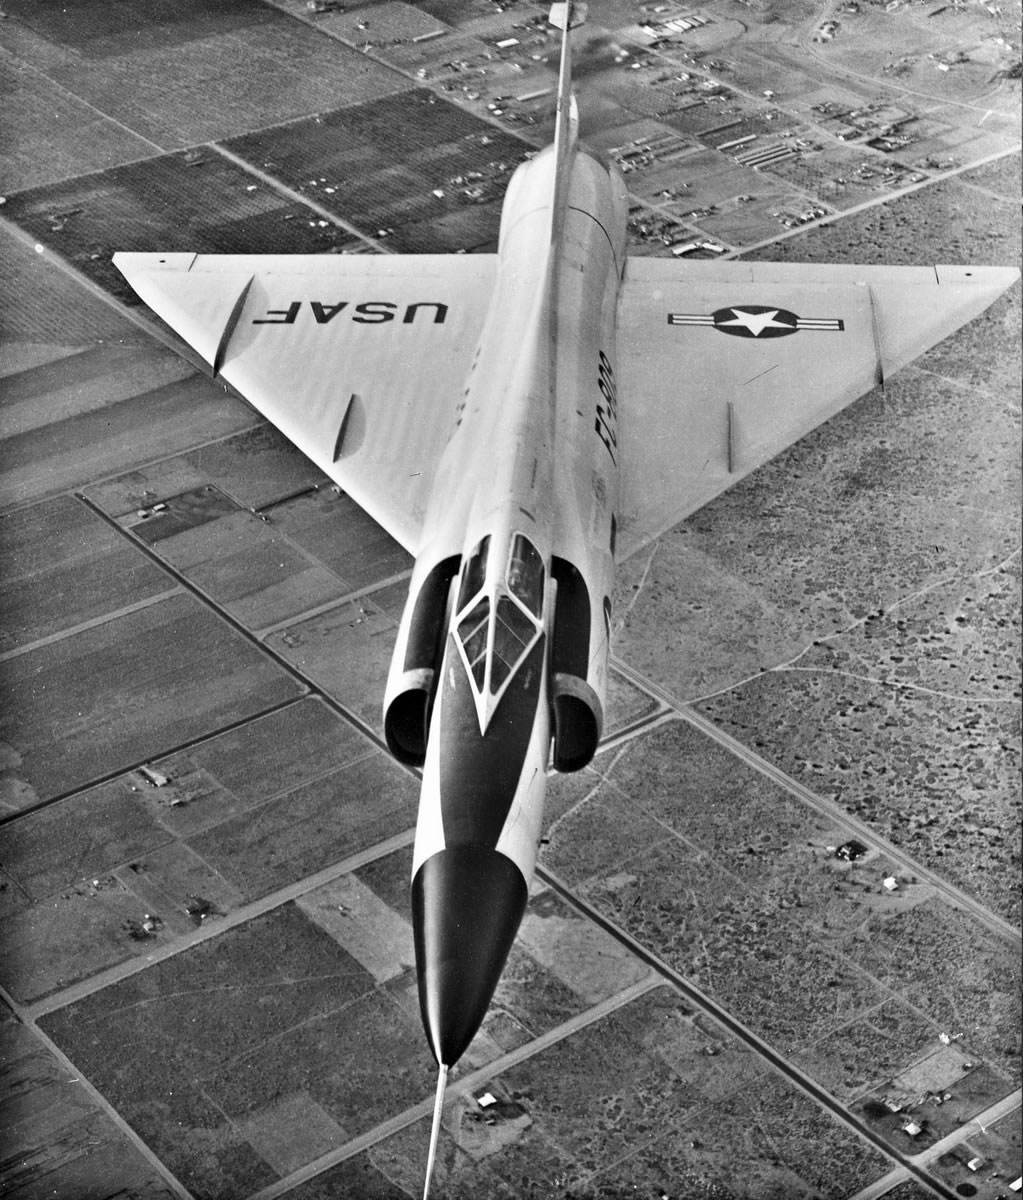 Compare this overhead view of a Convair F-102A-90-CO Delta Dagger, 57-0809, to that of the prototype YF-102 at top. The "wasp waist" area rule fuselage is very noticeable. U.S. Air Force) 